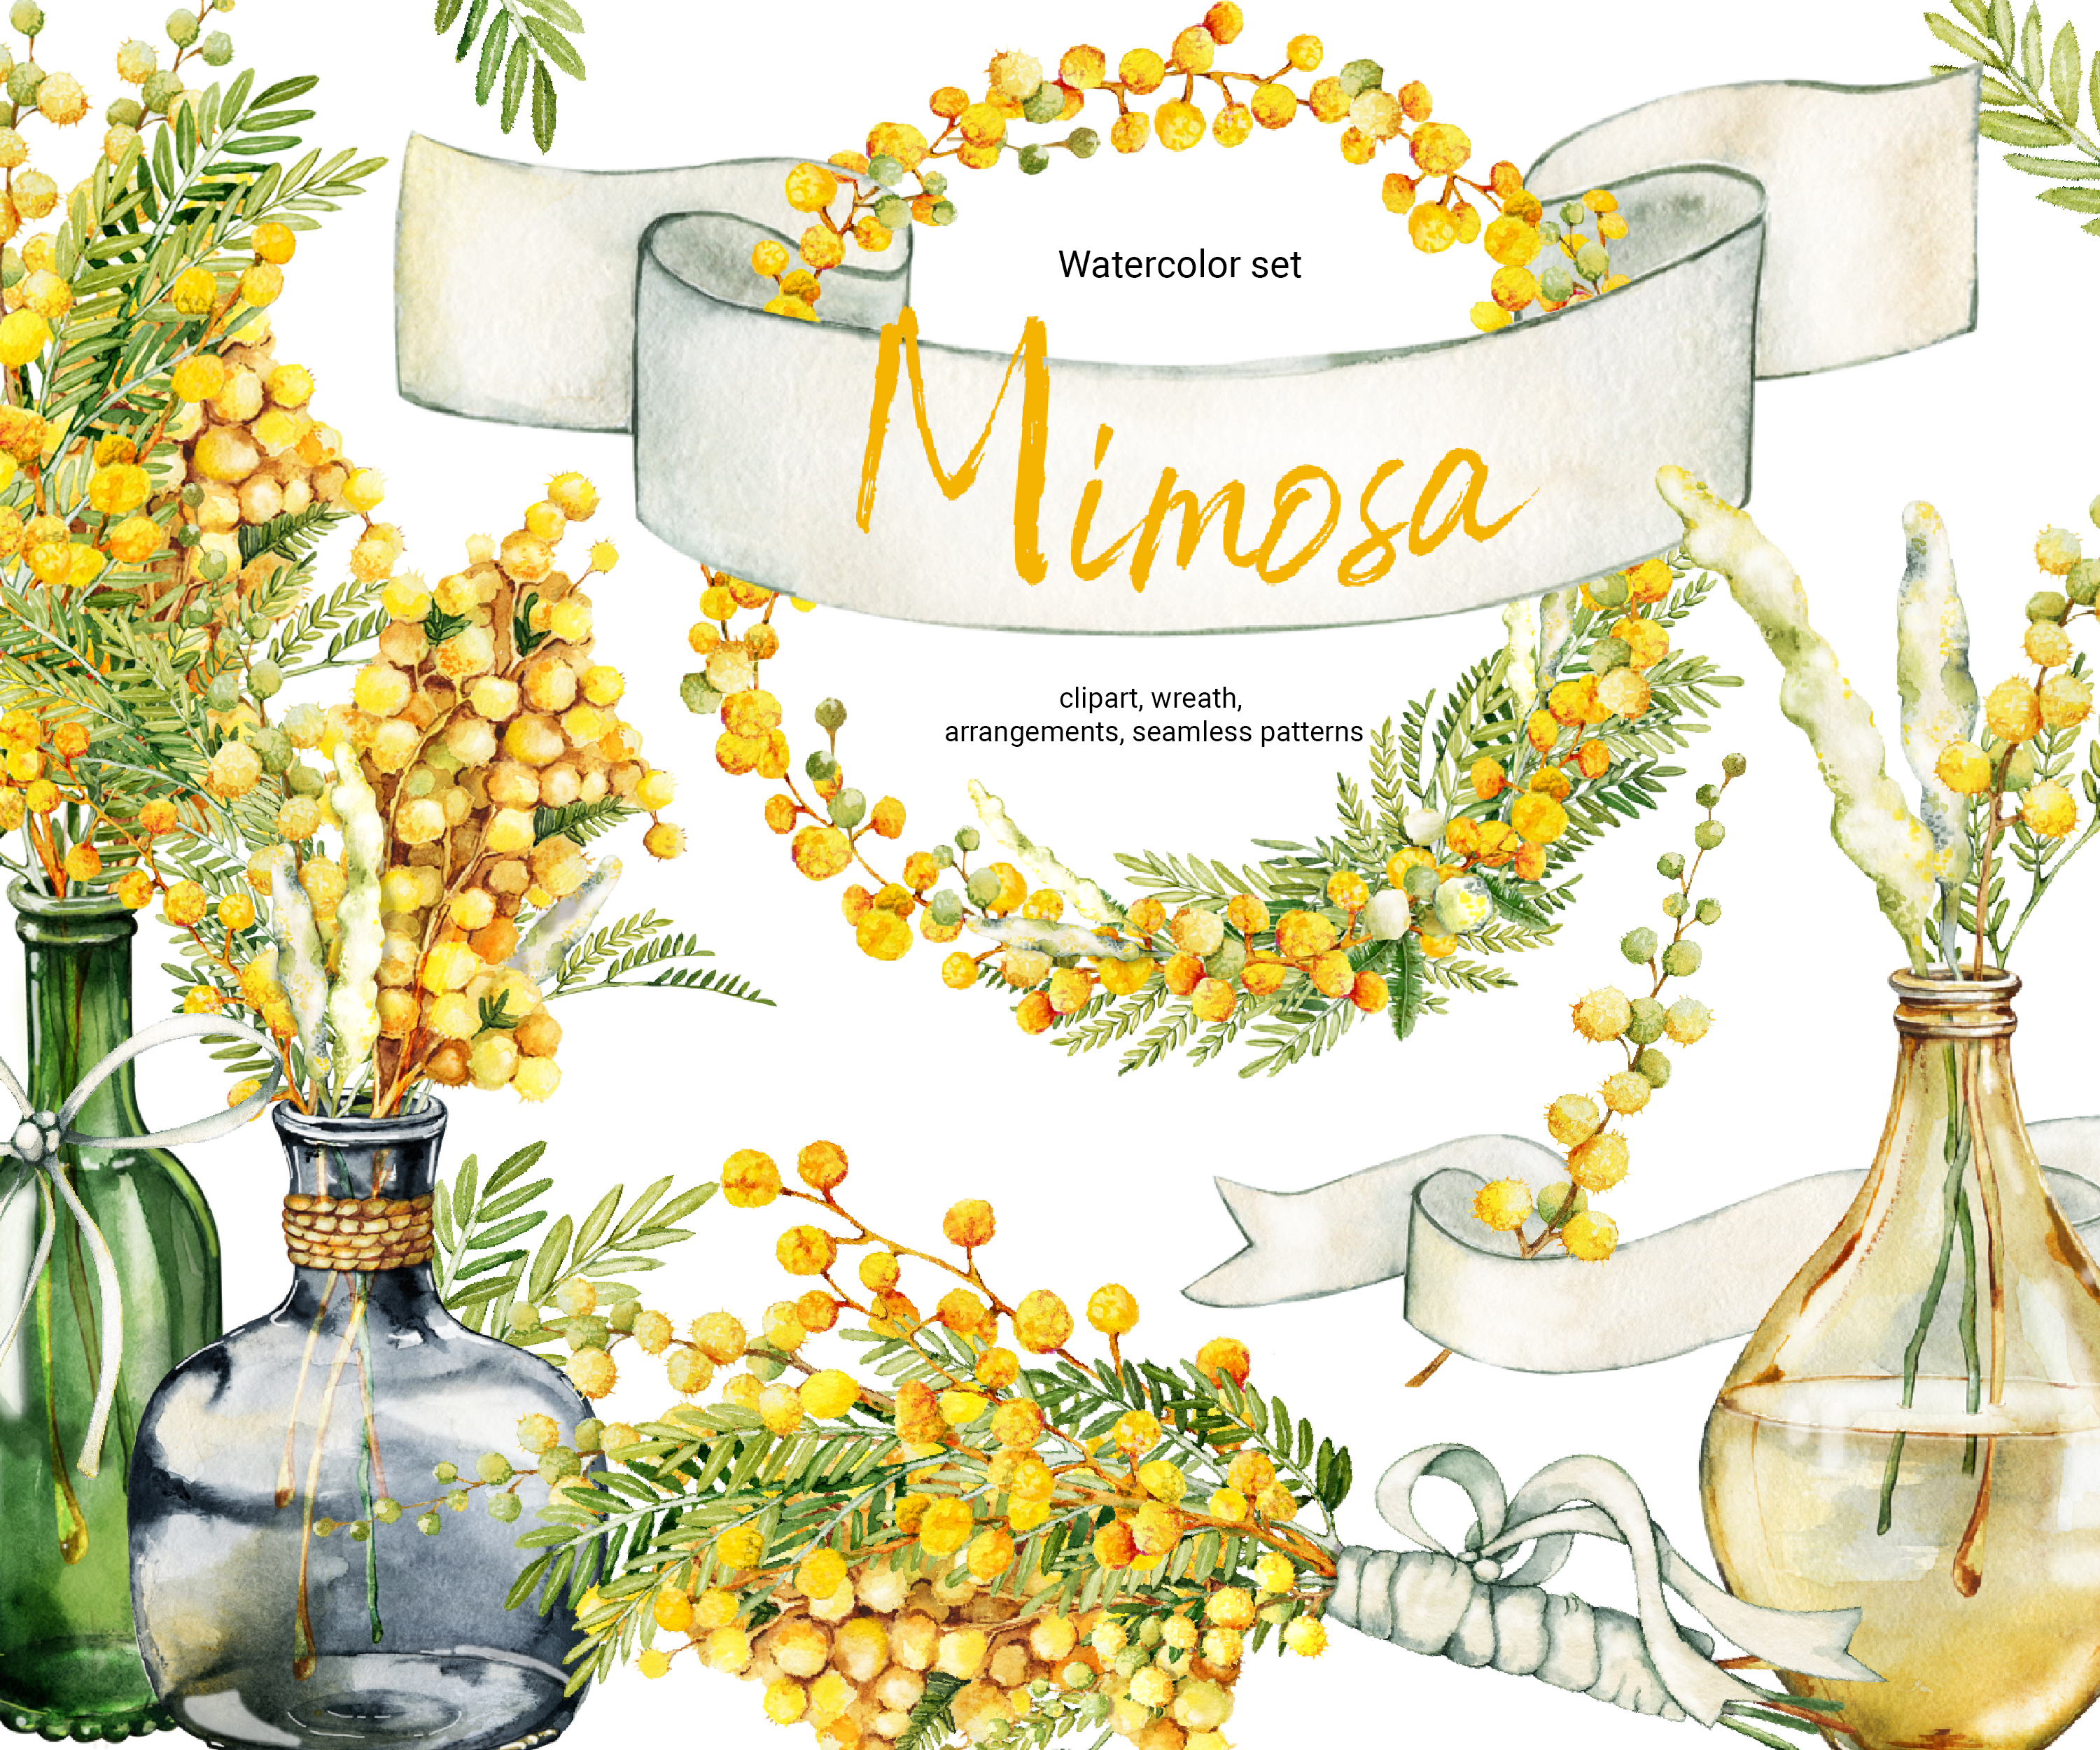 mimosas clipart of flowers